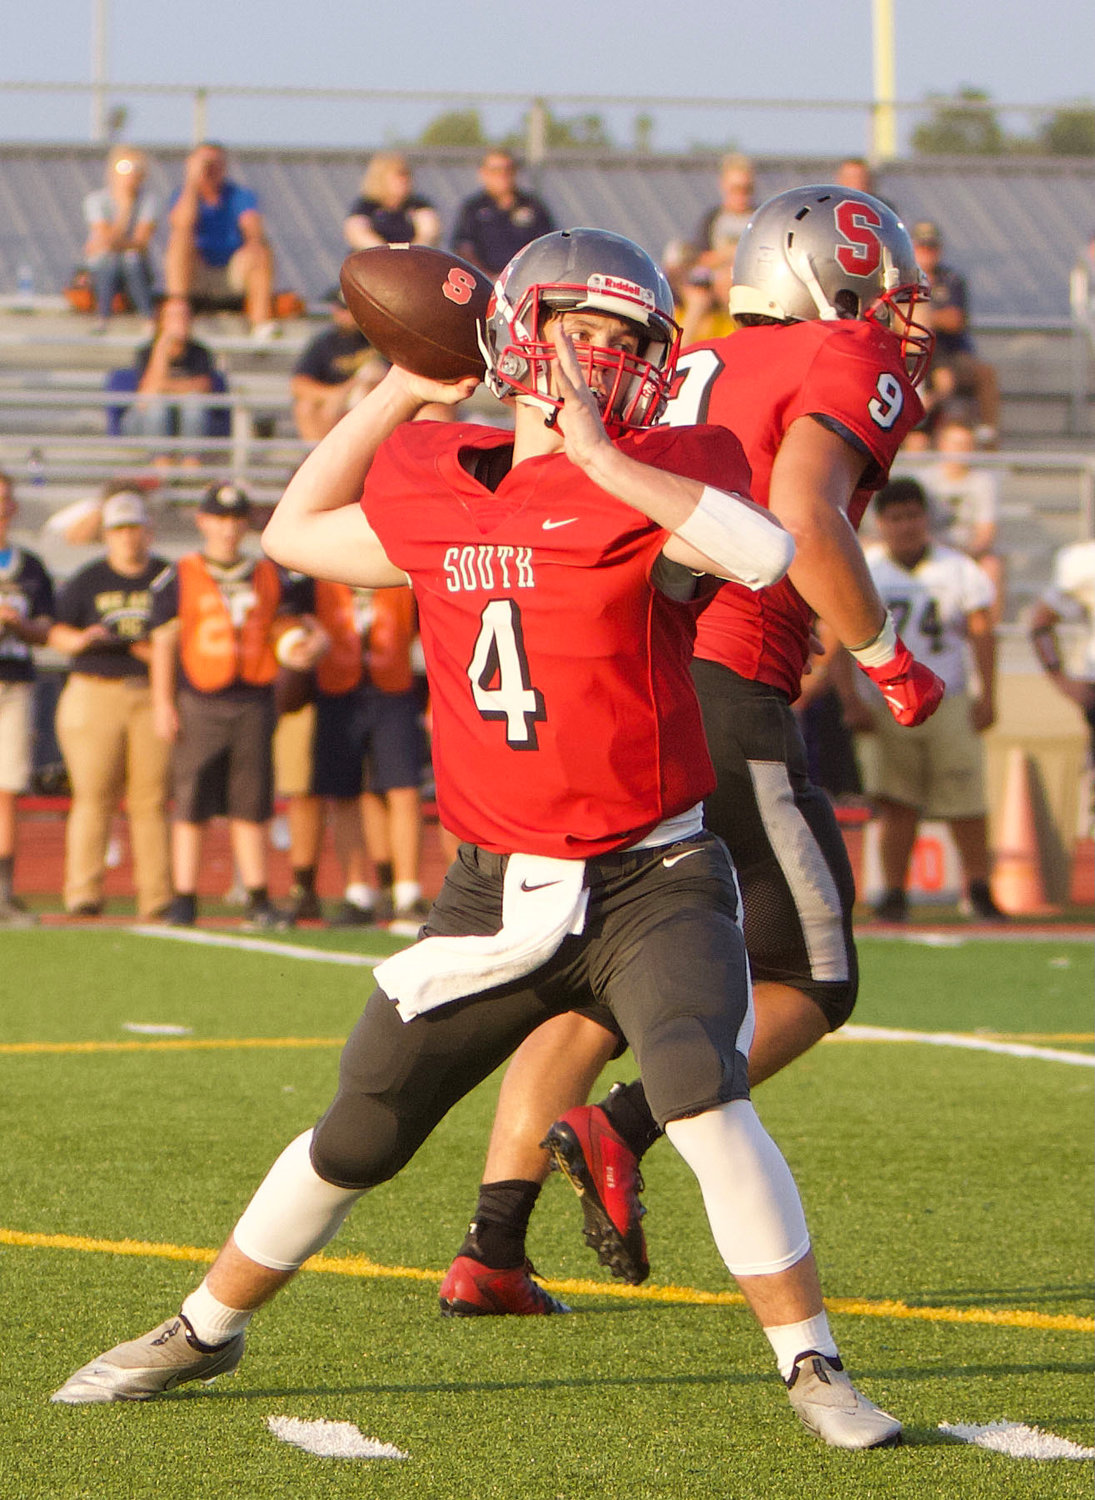 Nick Scott throws the football against Fountain Central on Friday.